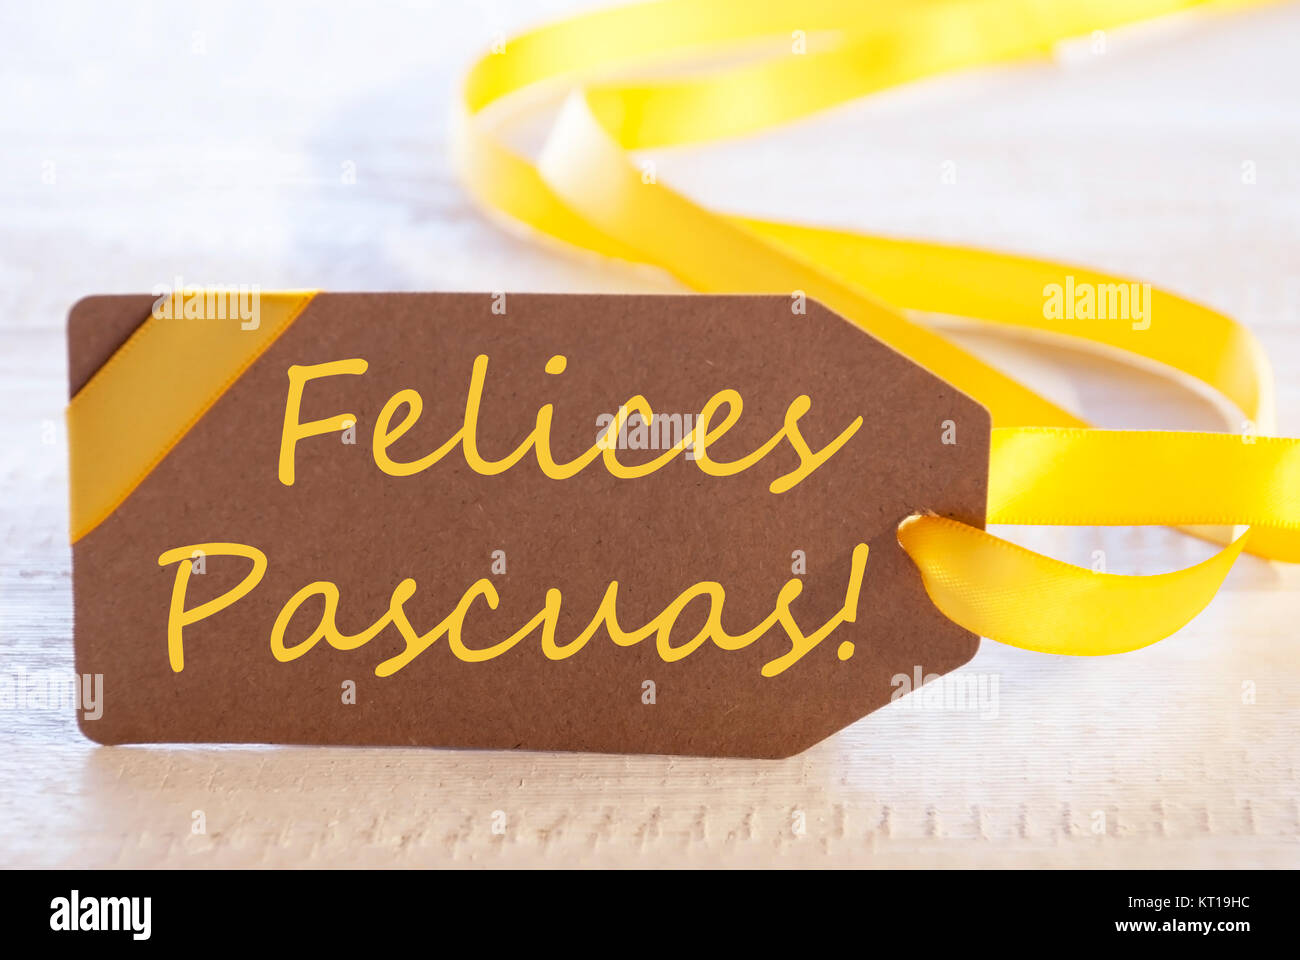 Label With Spanish Text Felices Pascuas Means Happy Easter. White Wooden Background. Card For Seasons Greetings Or Easter Greetings Stock Photo